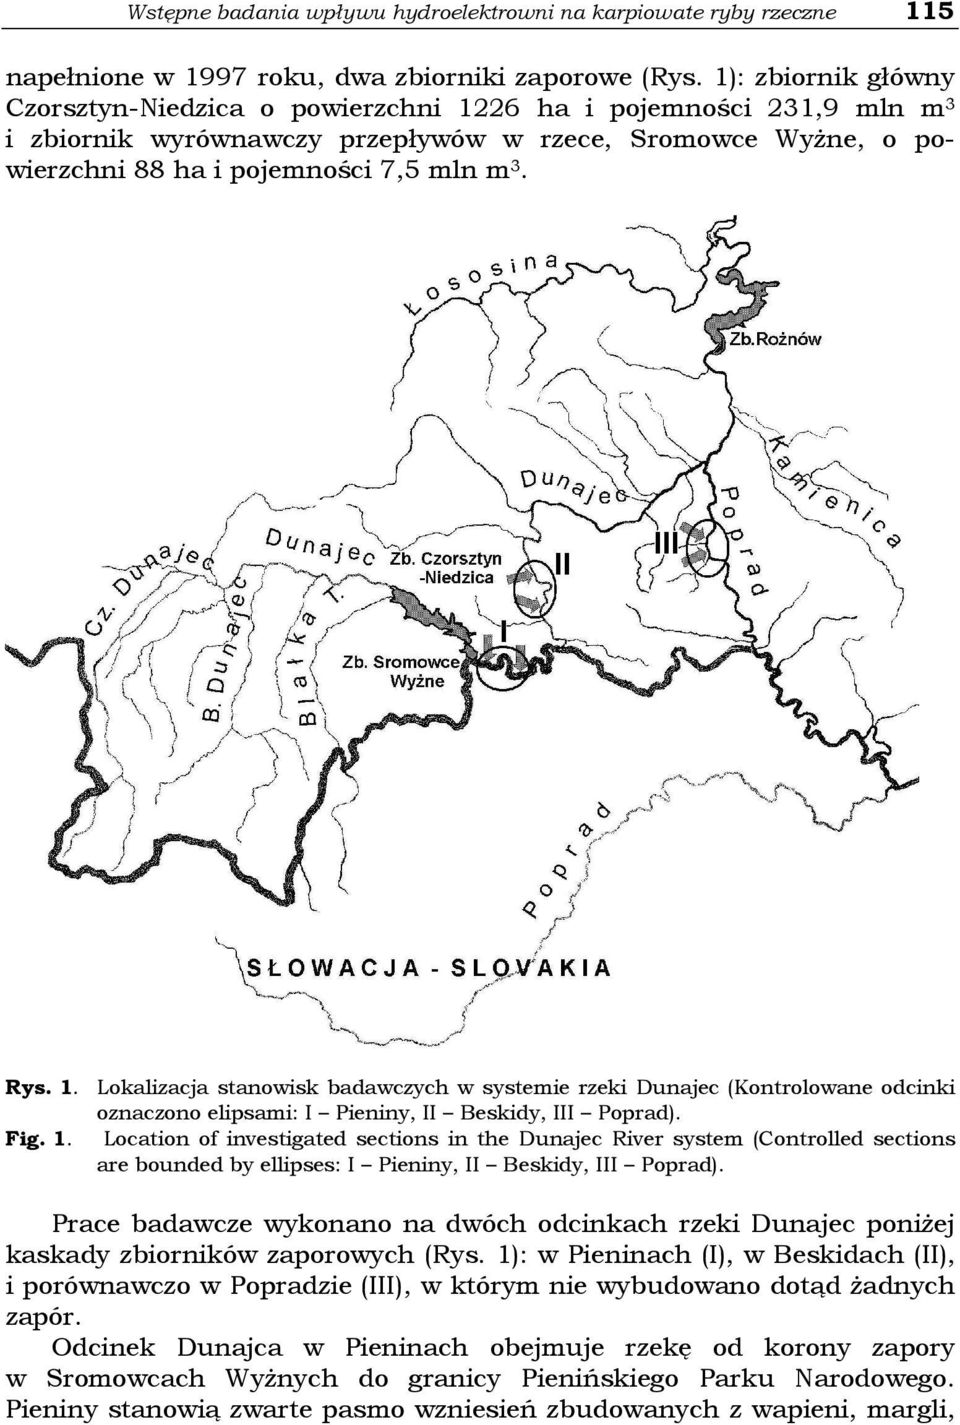 Fig. 1. Location of investigated sections in the Dunajec River system (Controlled sections are bounded by ellipses: I Pieniny, II Beskidy, III Poprad).